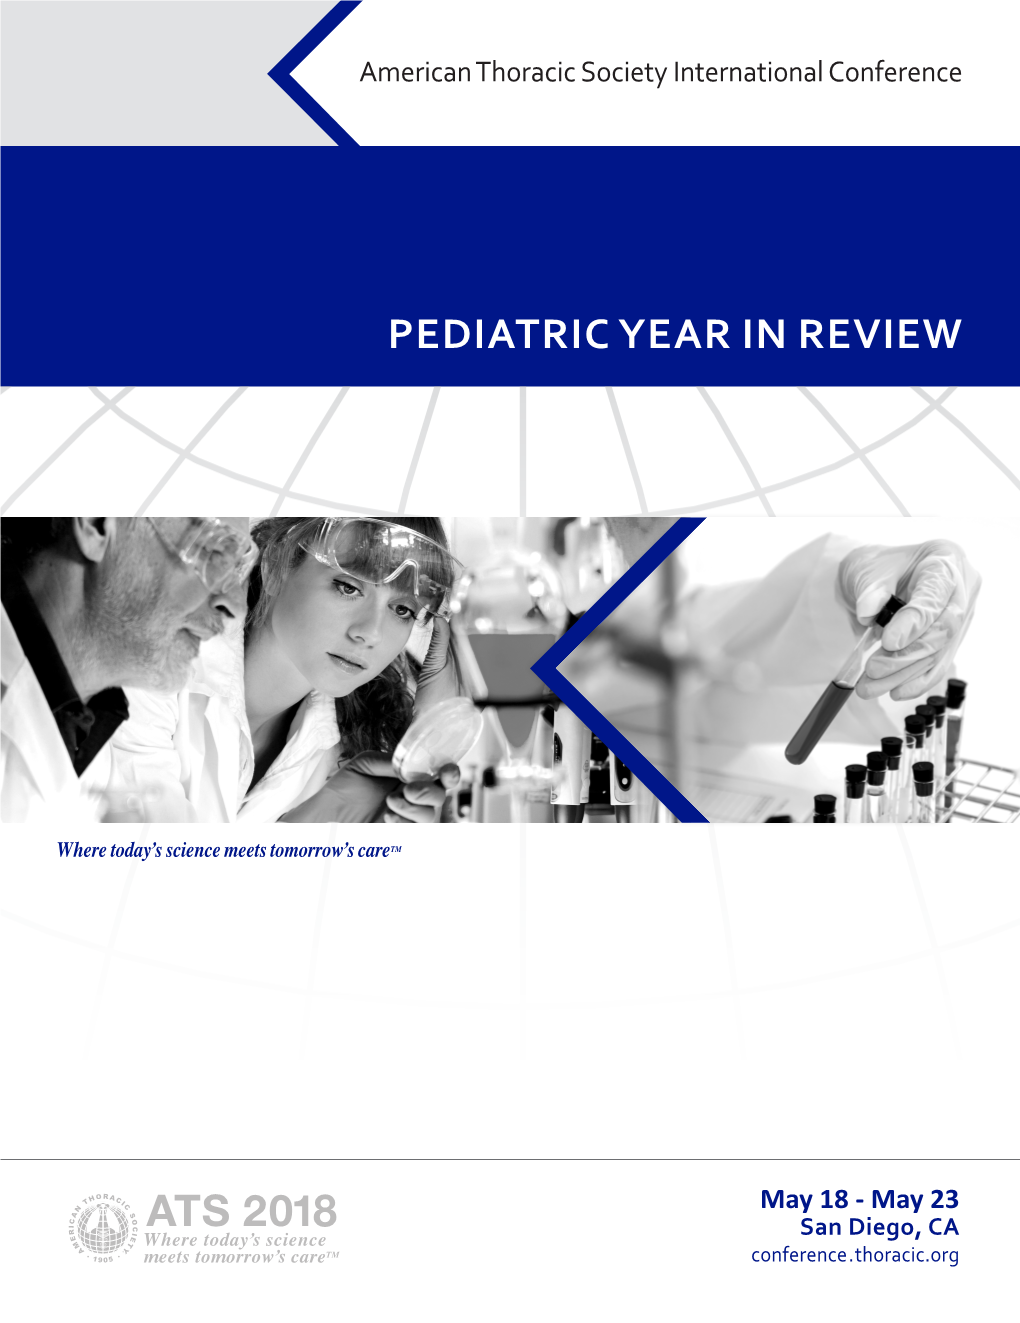 Pediatric Year in Review